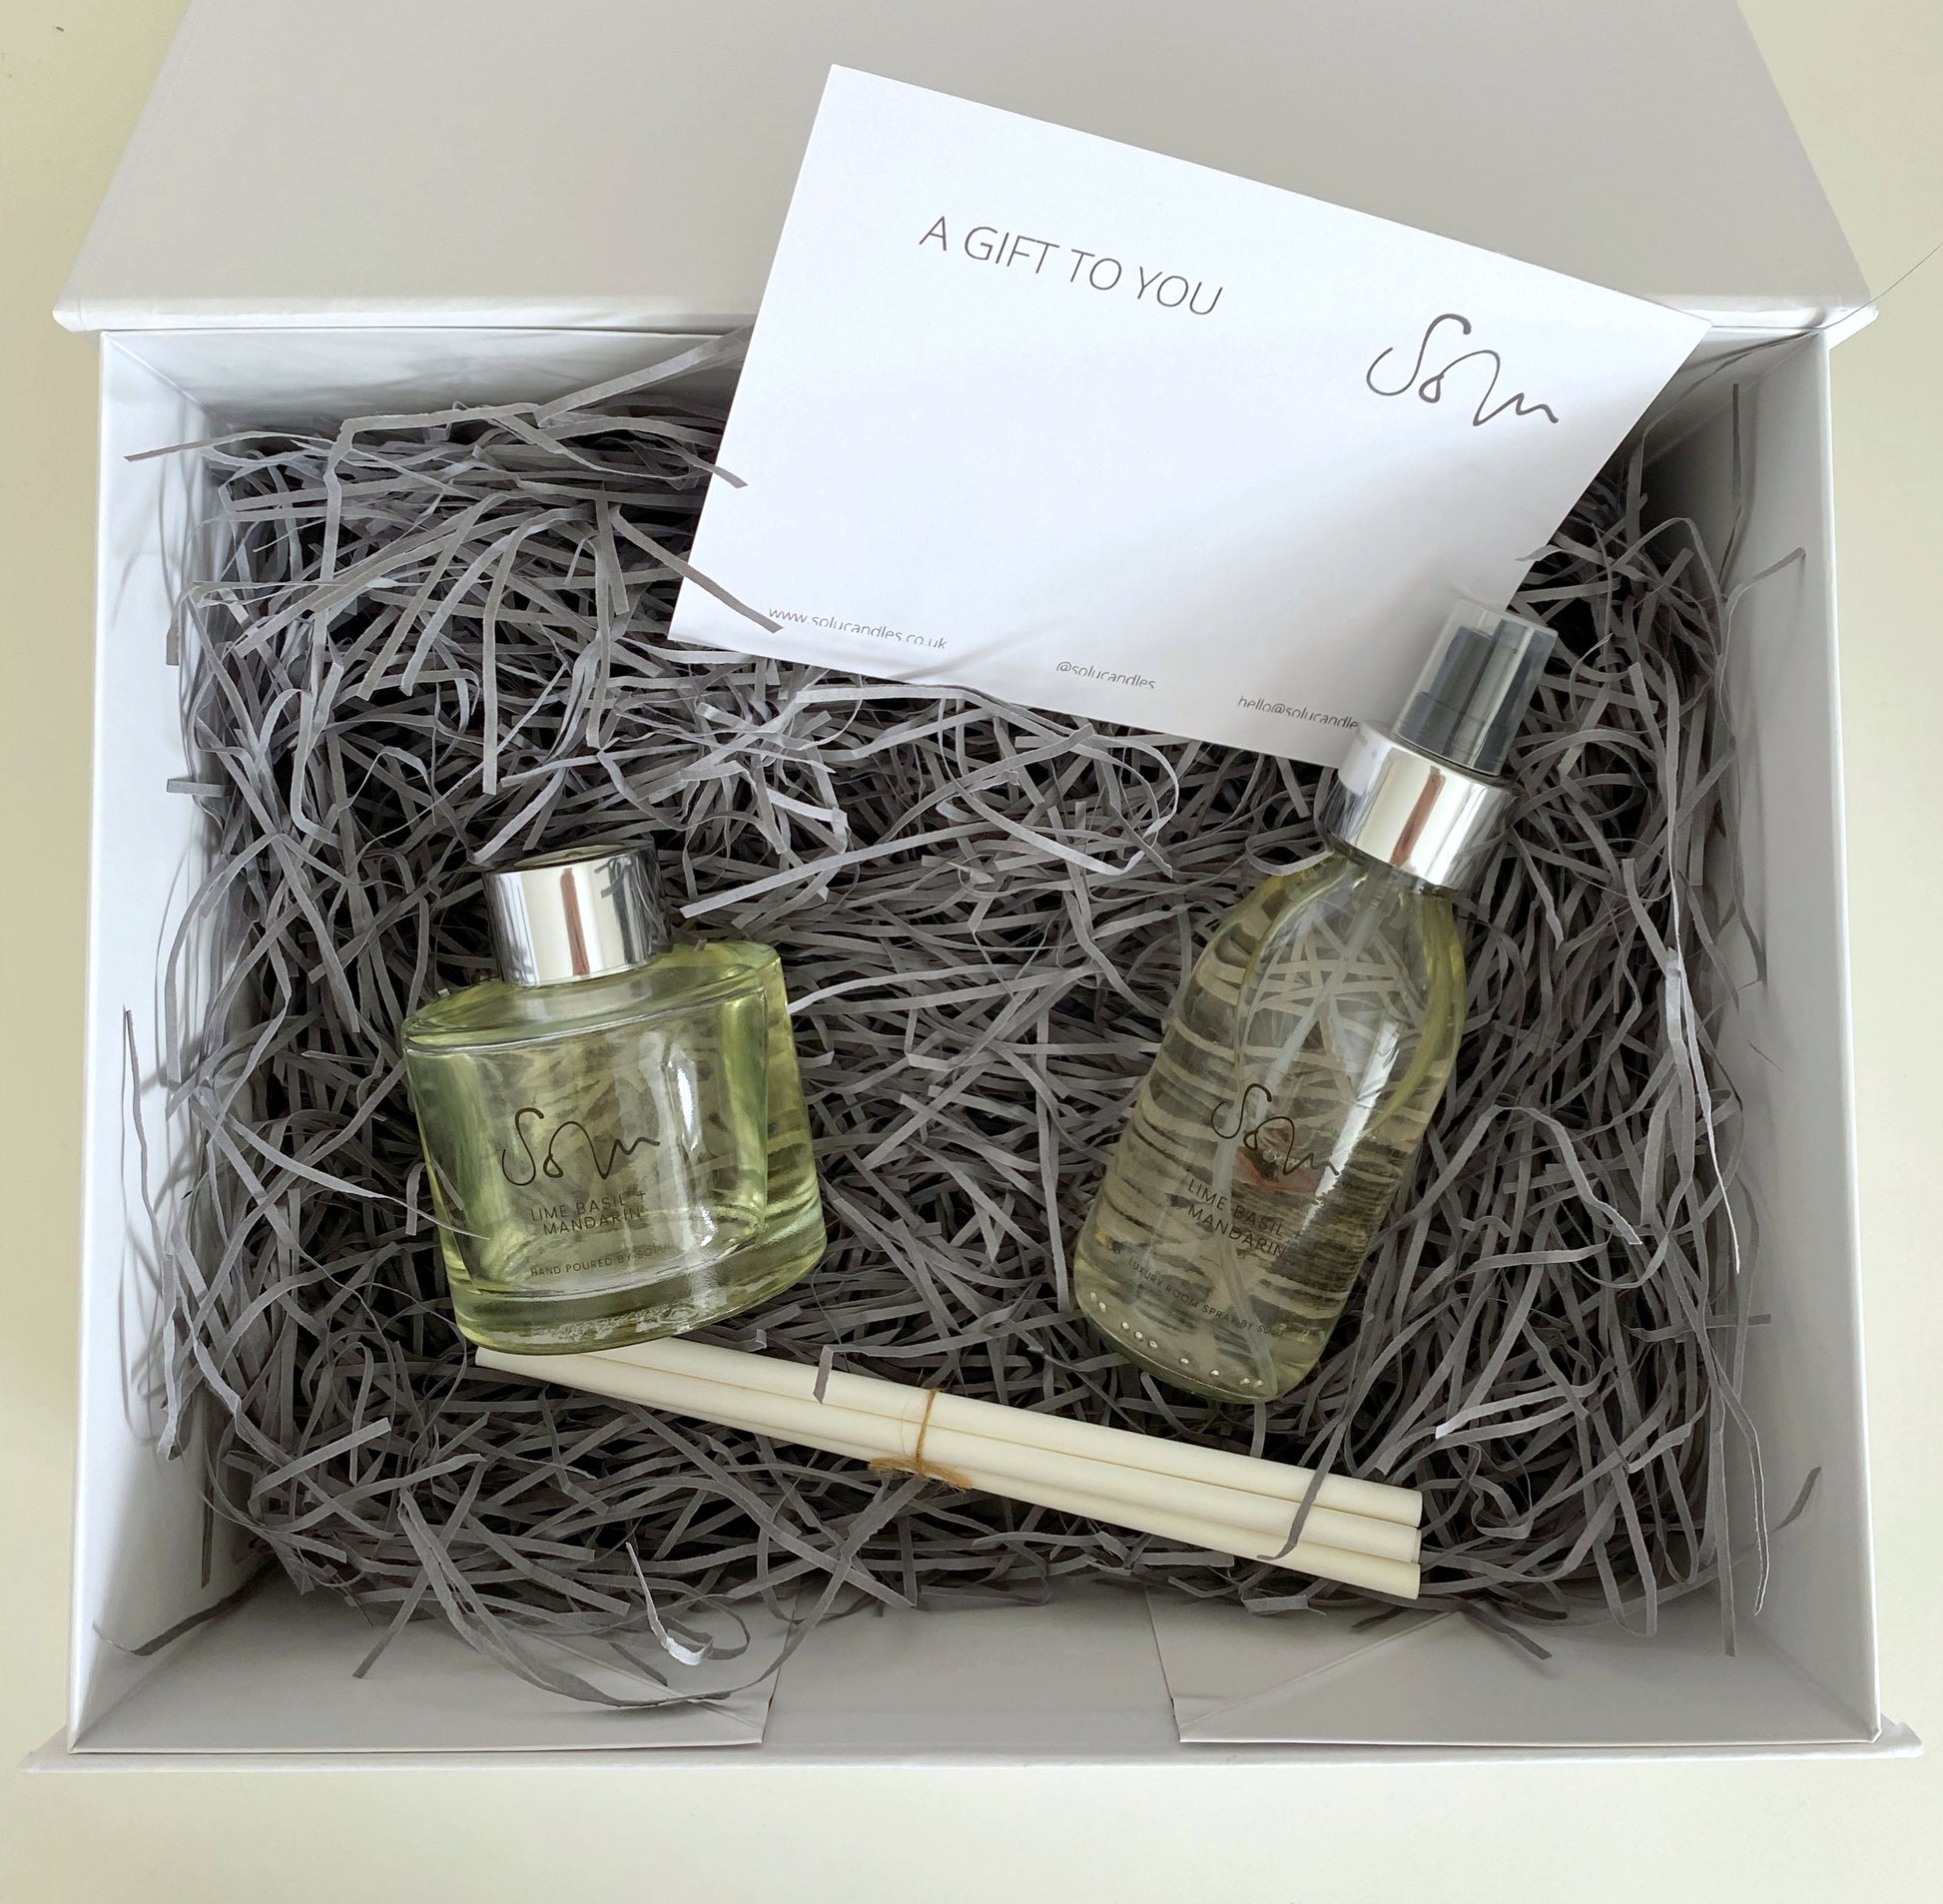 Diffuser and Room Spray Gift Set - Solu Candles